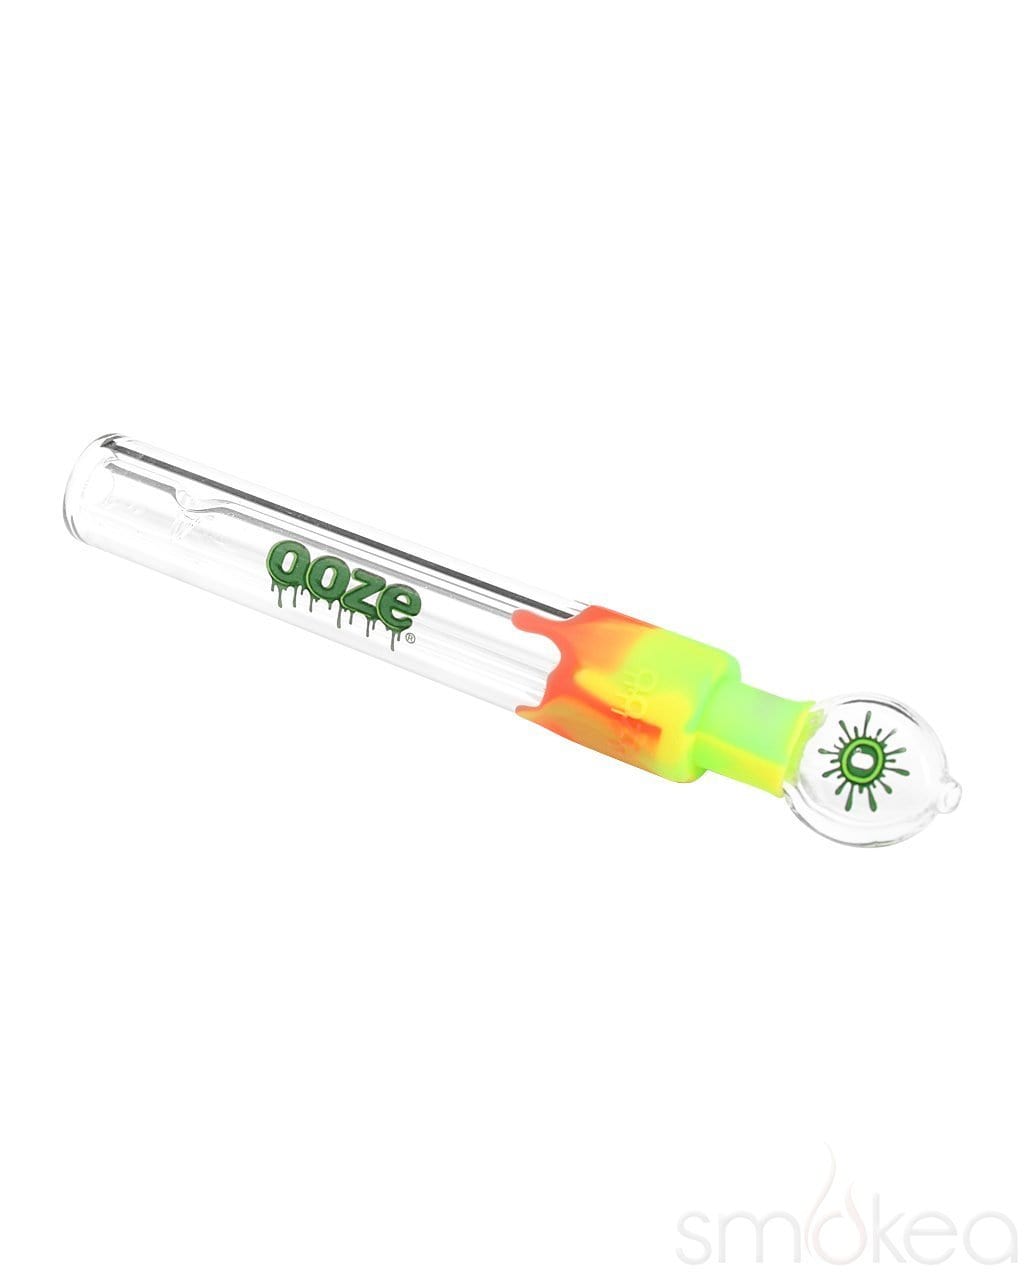 OOZE SLIDER GLASS BLUNT  ASSORTED - Crowntown Cannabis